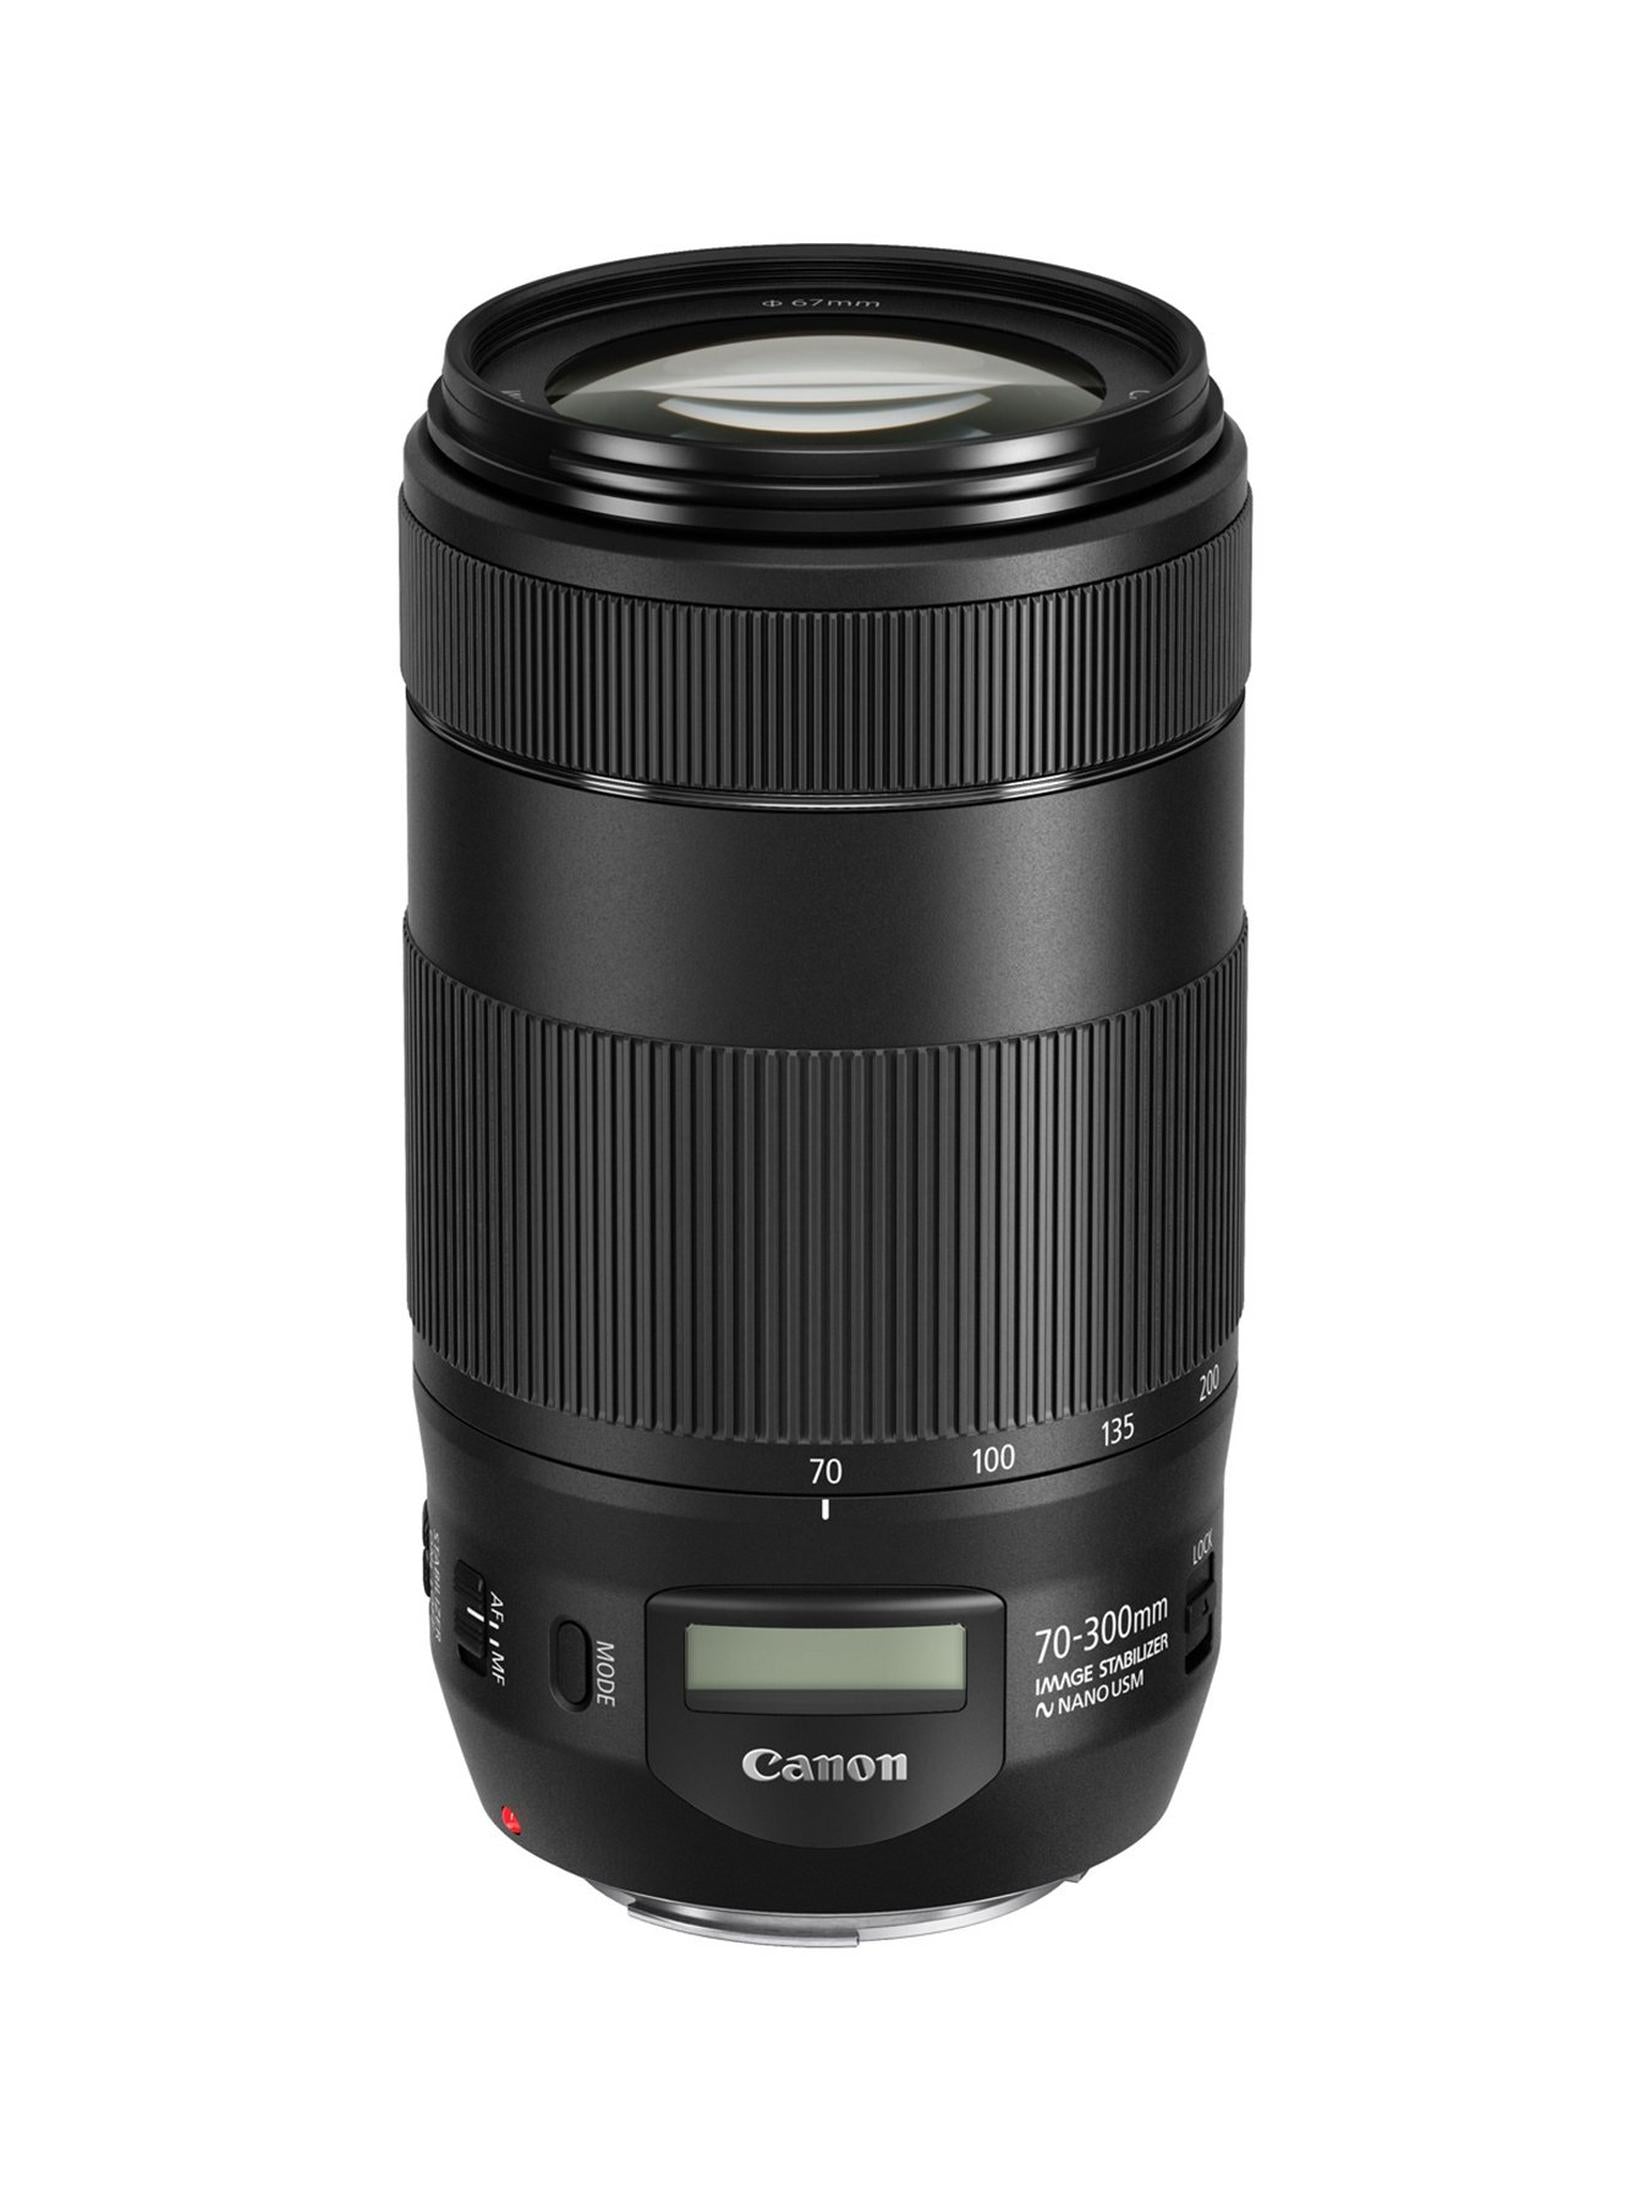 Canon EF 70-300mm F4-5.6 IS II USM Telephoto Zoom Image Stabilised Camera Lens - Product Photo 6 - Stand up view with  glass and focus display visible